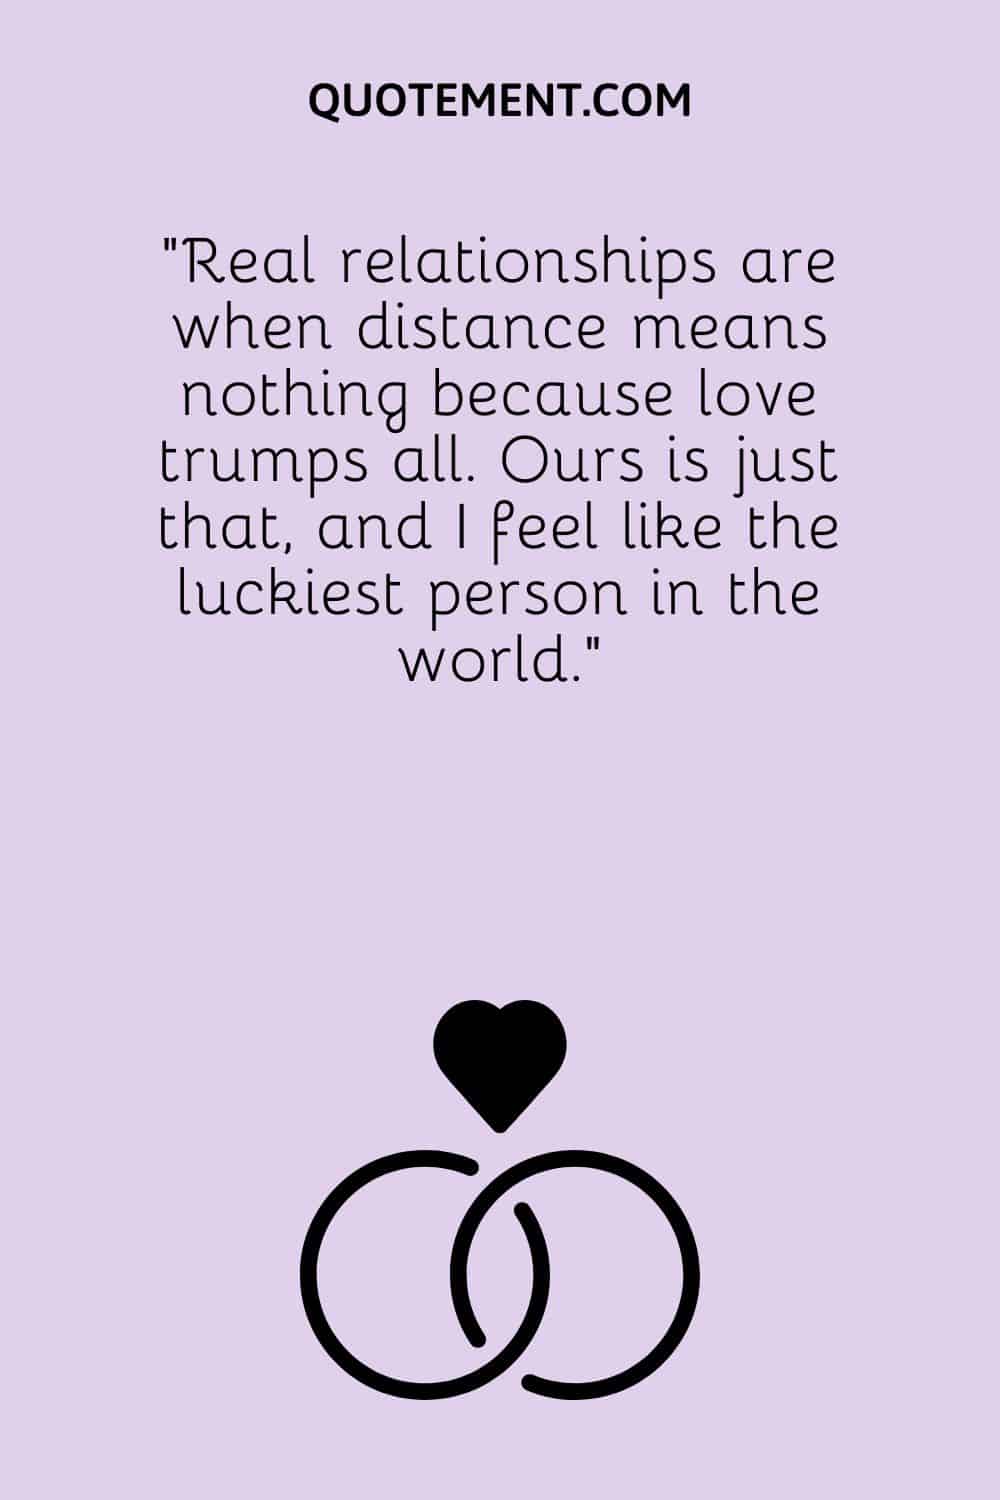 Real relationships are when distance means nothing because love trumps all